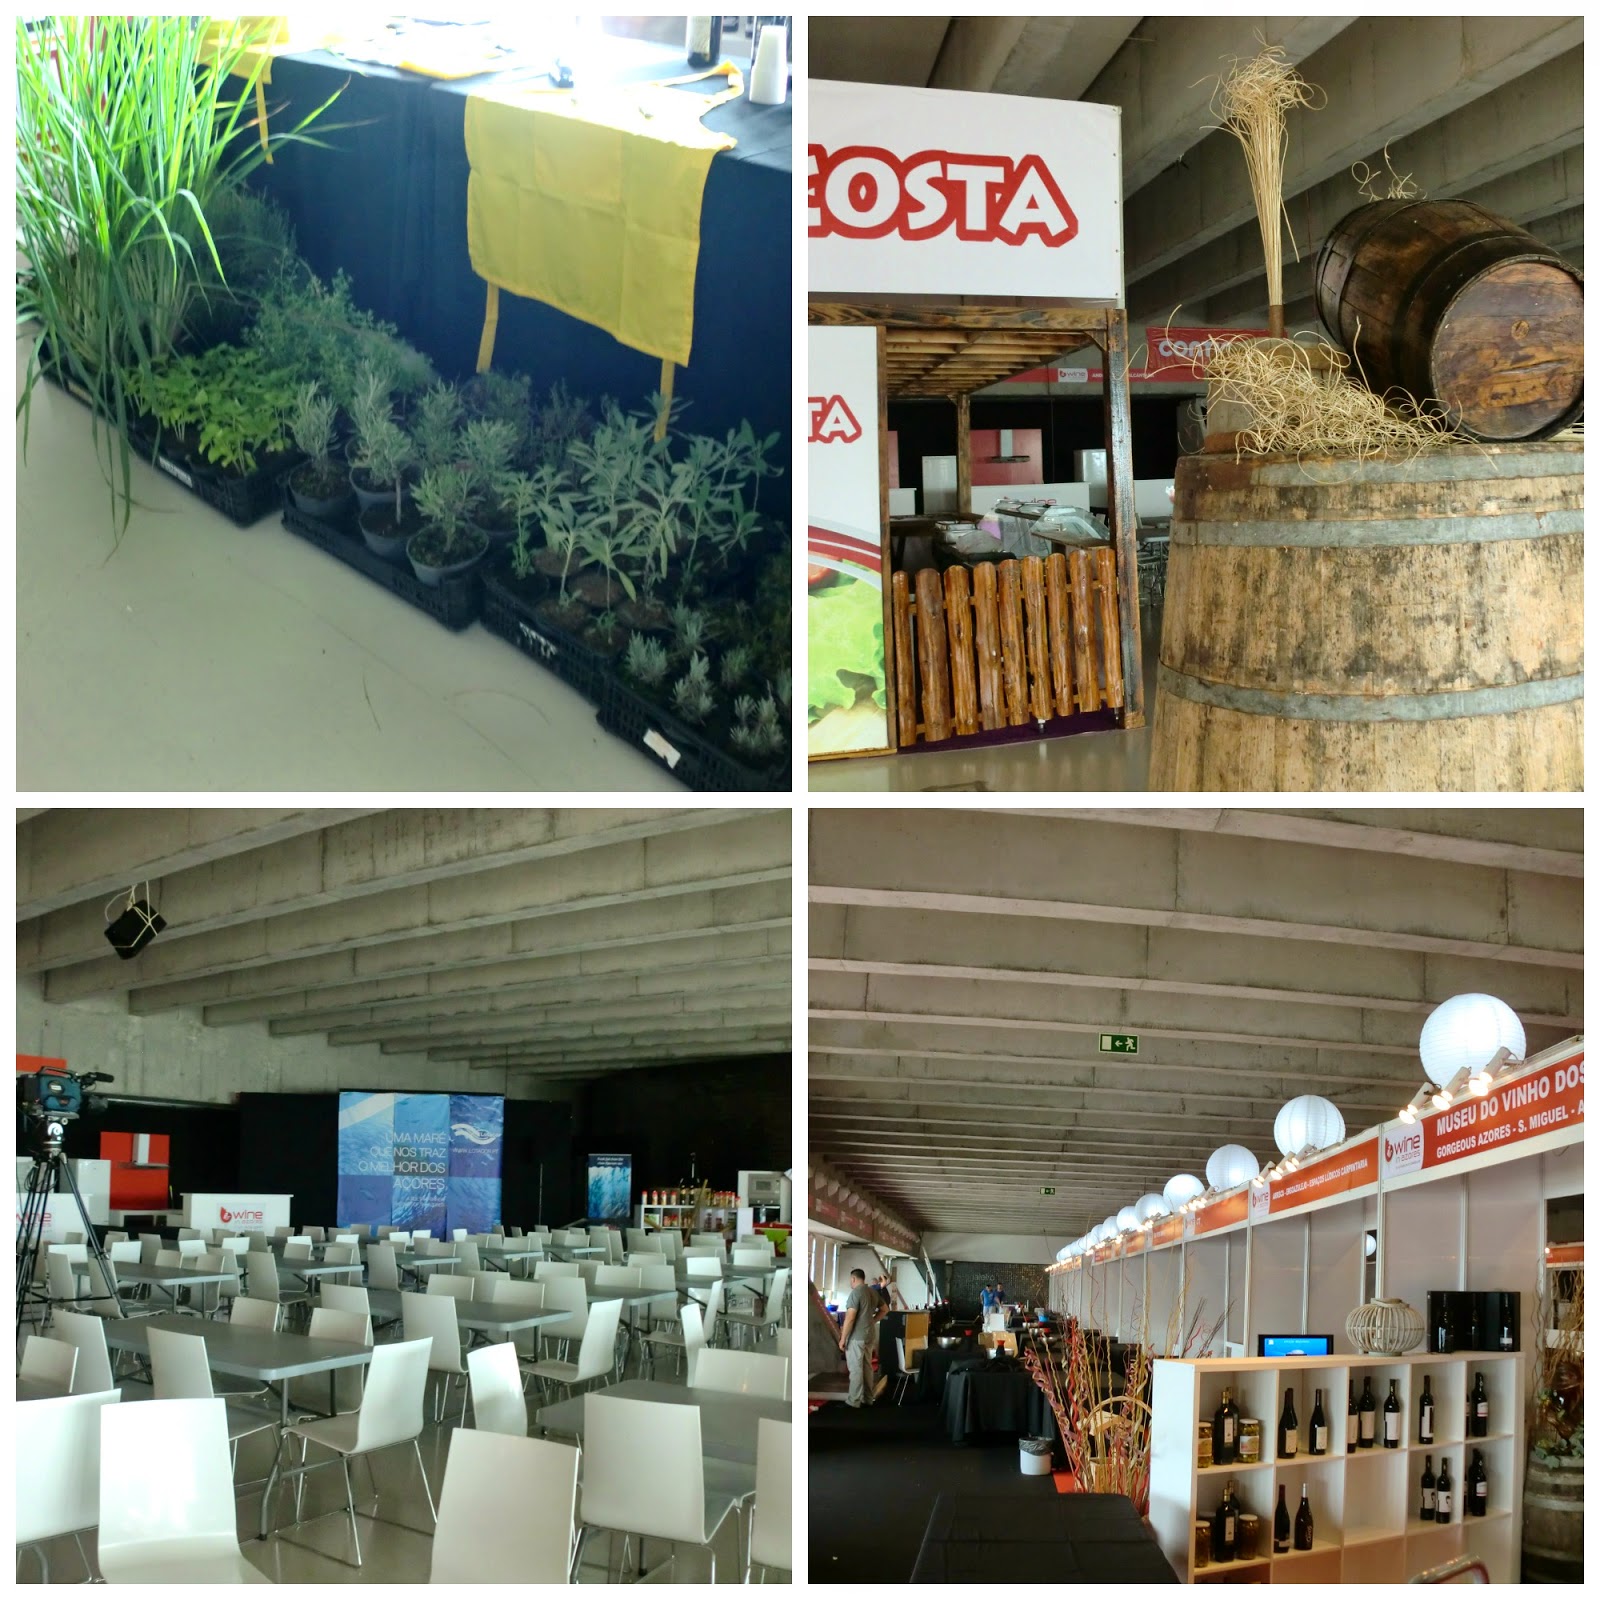 Wine in Azores 2014 - Behind the Scenes - Parte 2!